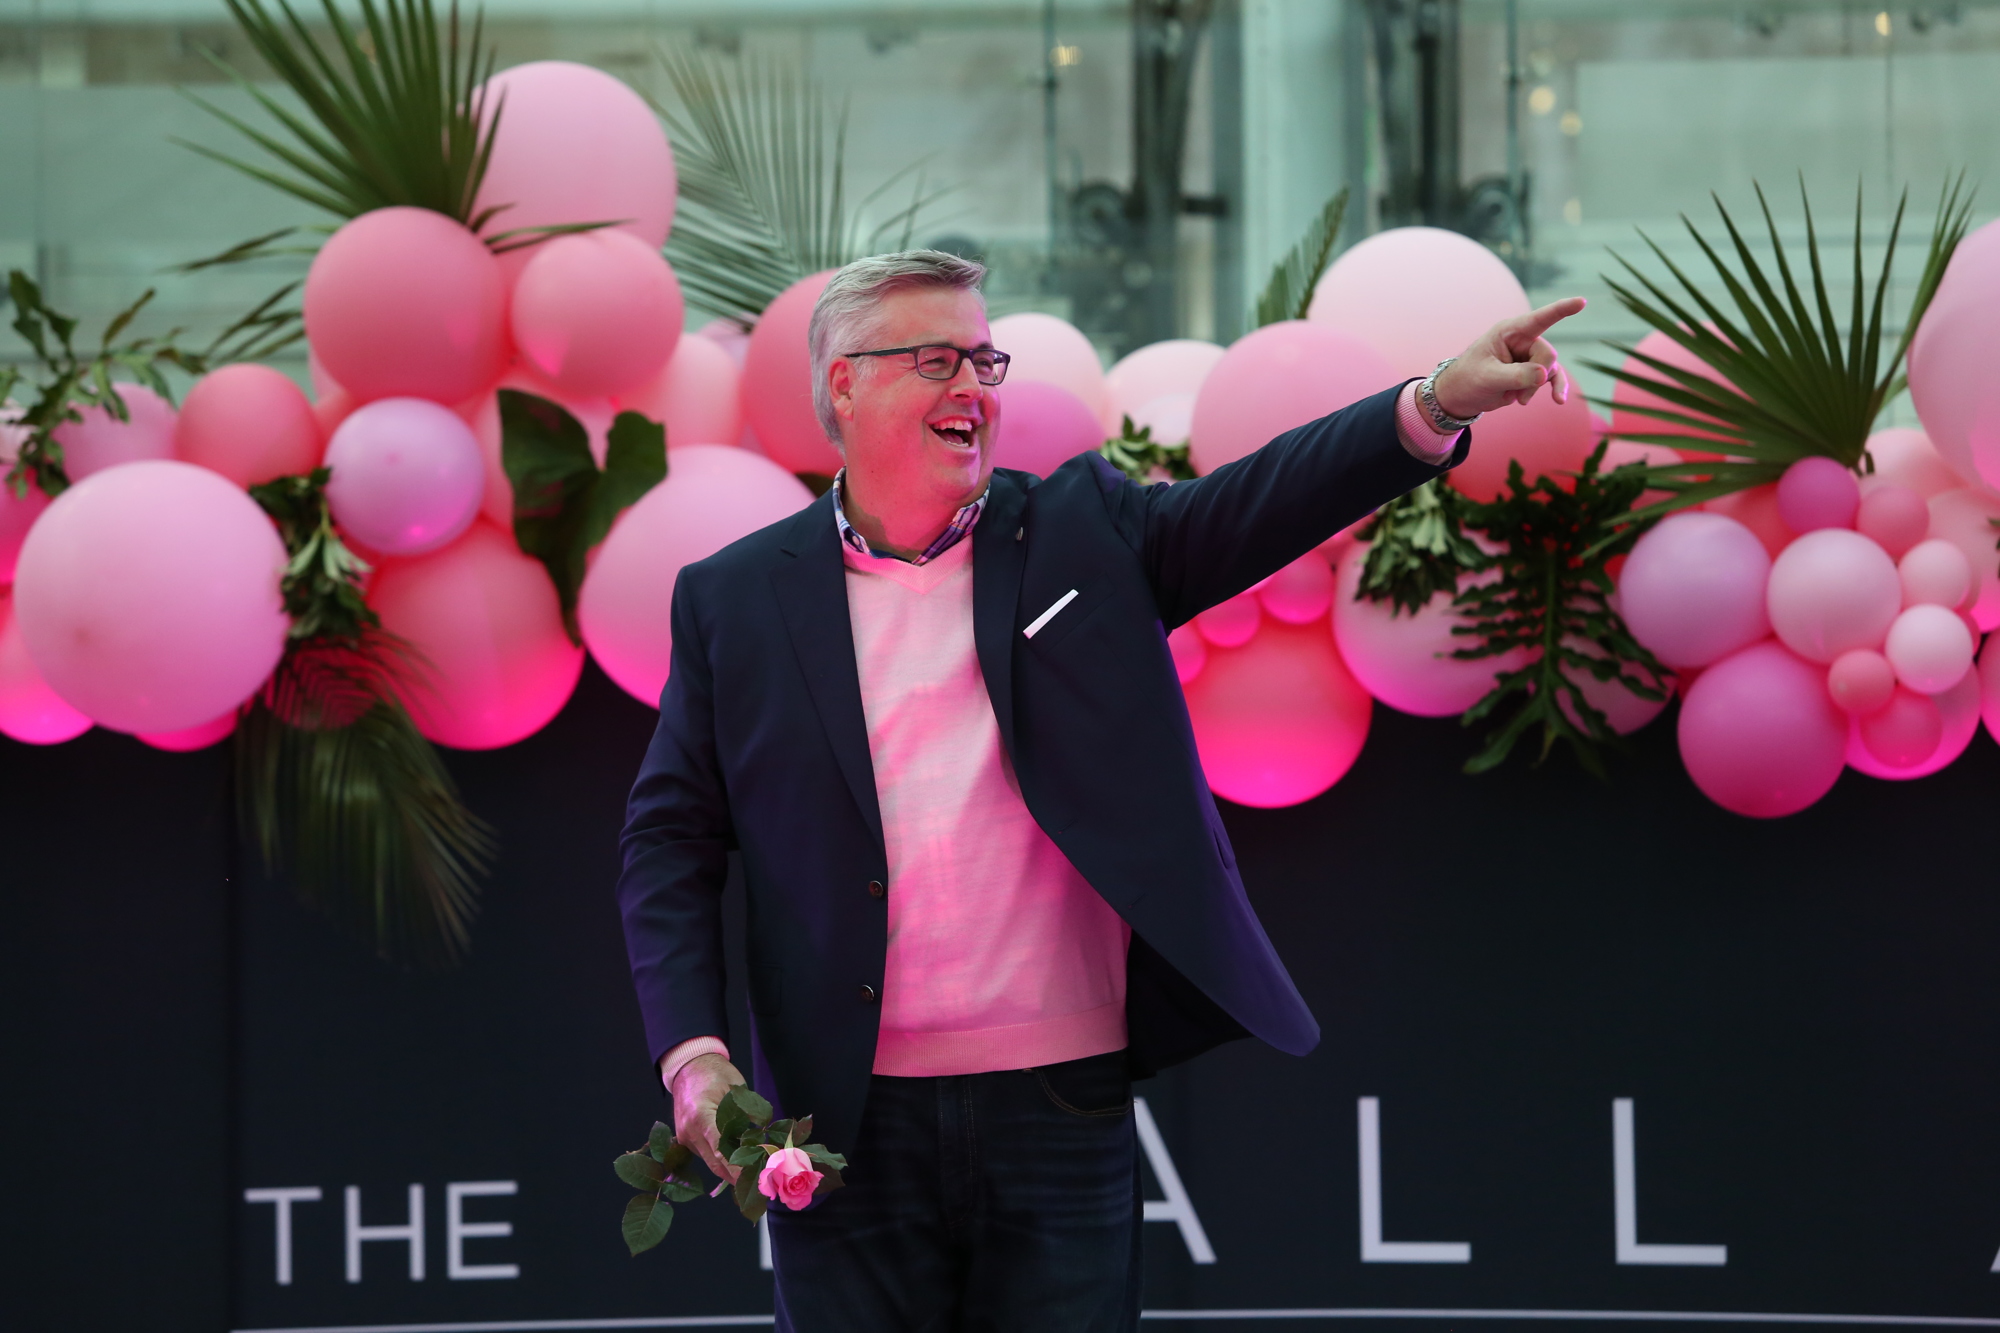 Lakewood Ranch's Ted Baran, who is one of this year's Real Men Wear Pink ambassadors, points to the crowd during last year's fashion show. (File photo)